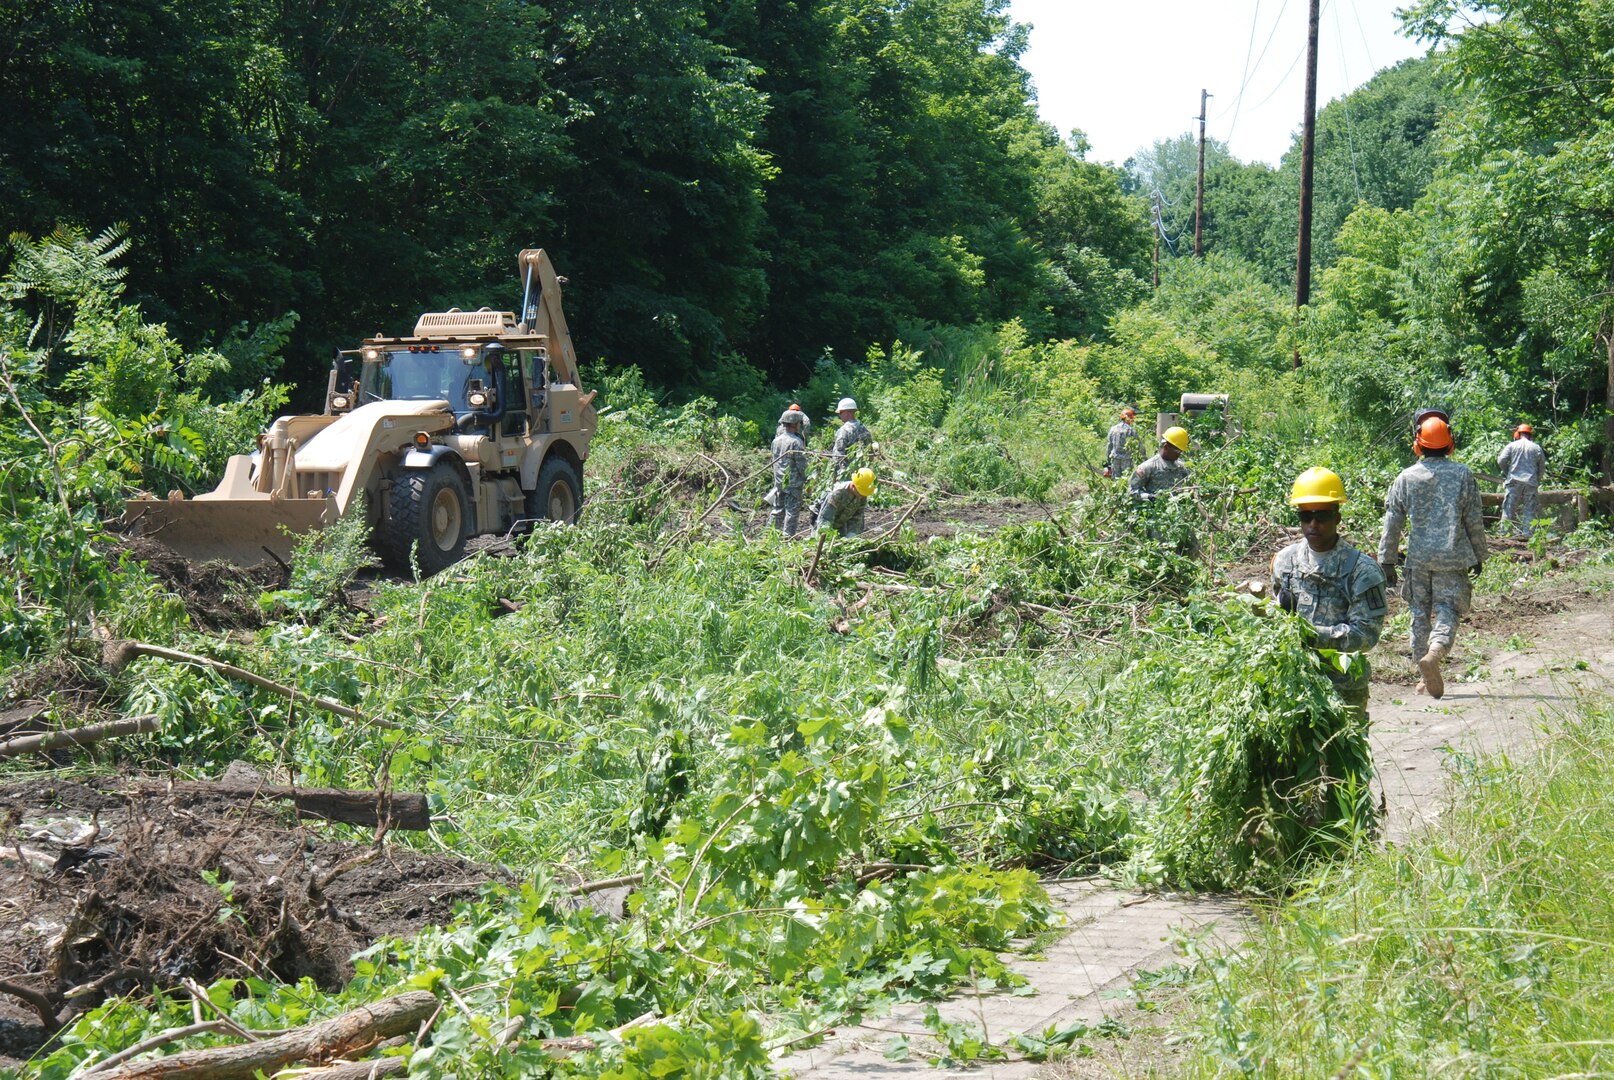 Soldiers from New York Army National Guard's 204th Engineer Battalion level trees and remove underbrush from the ruins of the Erie Canal in Cohoes, N.Y., as part of a project to transform the canal area into a park and trail area, June 11, 2012. The project is part of Innovative Readiness Training, which allow Army National Guard and Army Reserve units the ability to take part in local community projects when the work involves the unit's combat tasks and the job is not something the municipal workforce or a private company would ordinarily be able to accomplish.